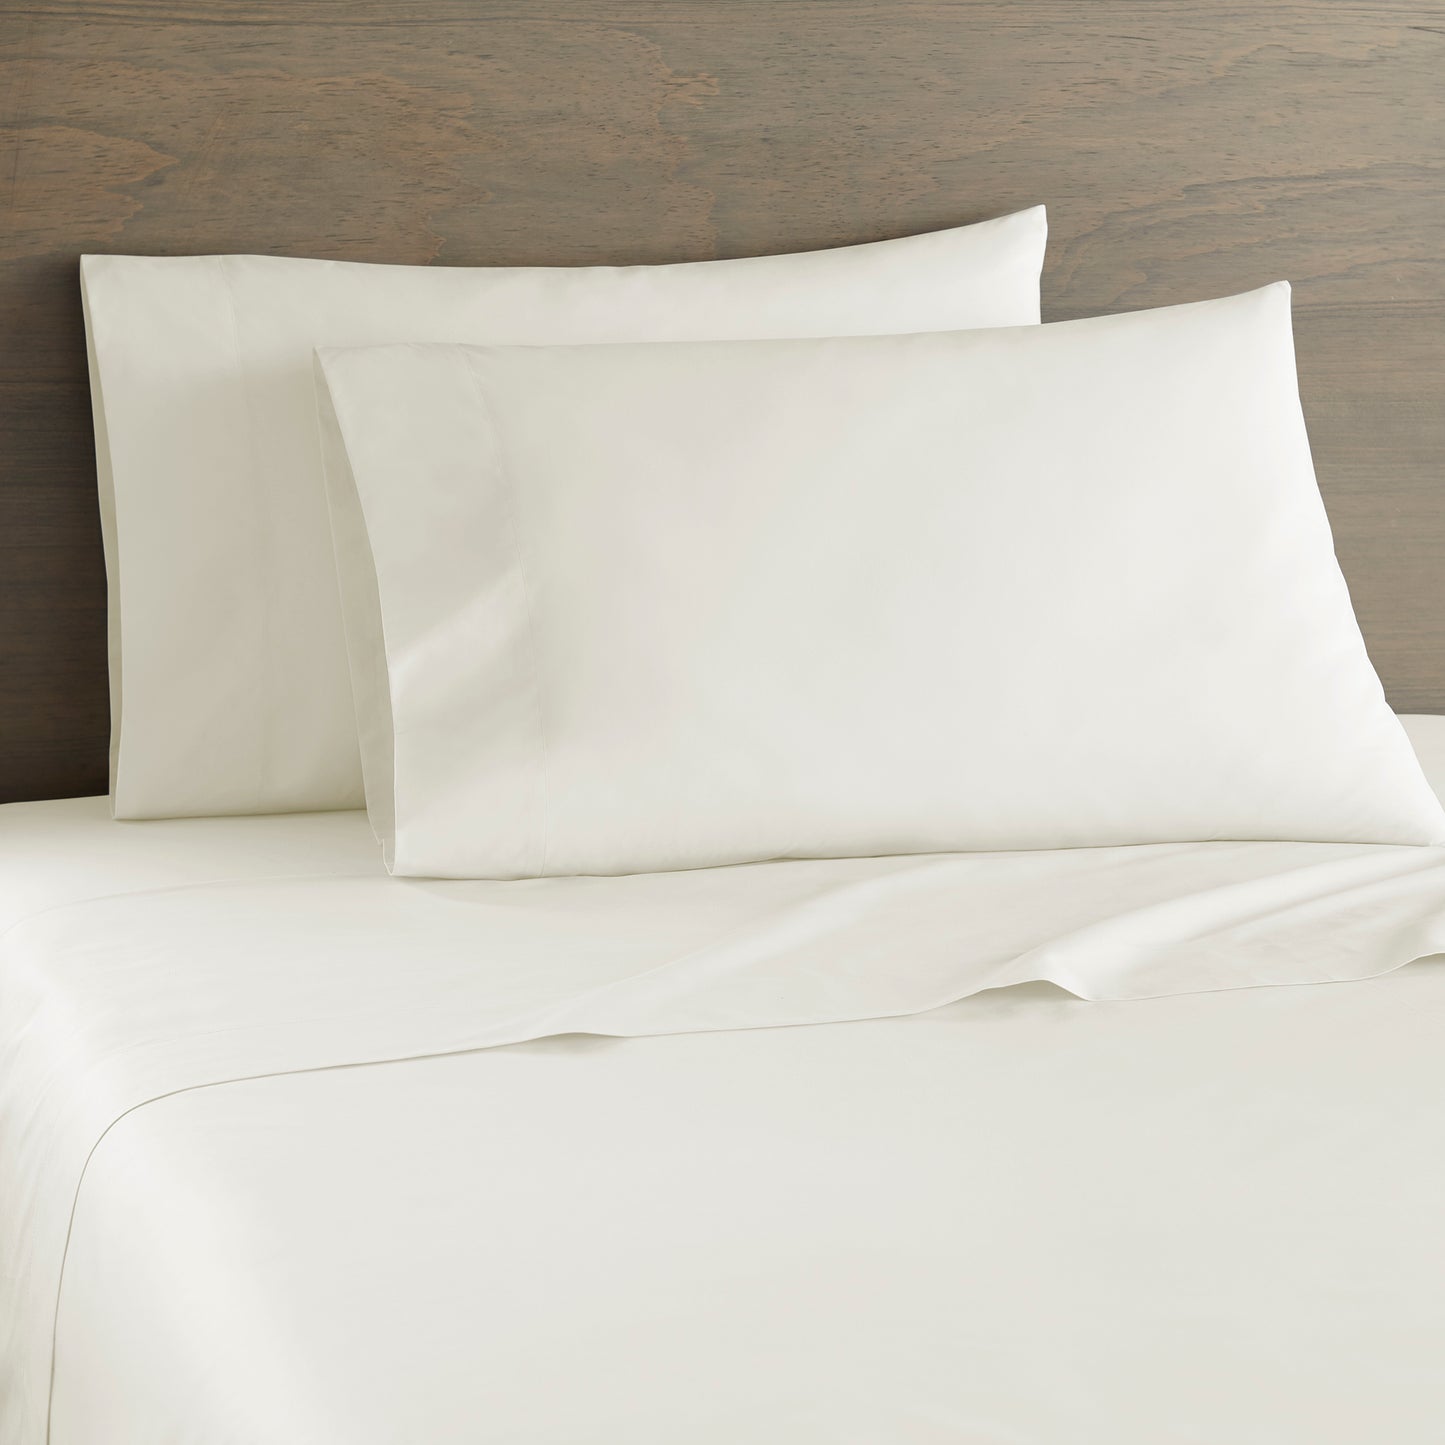 Cotton Percale 250 Thread Count Percale Sheet Set